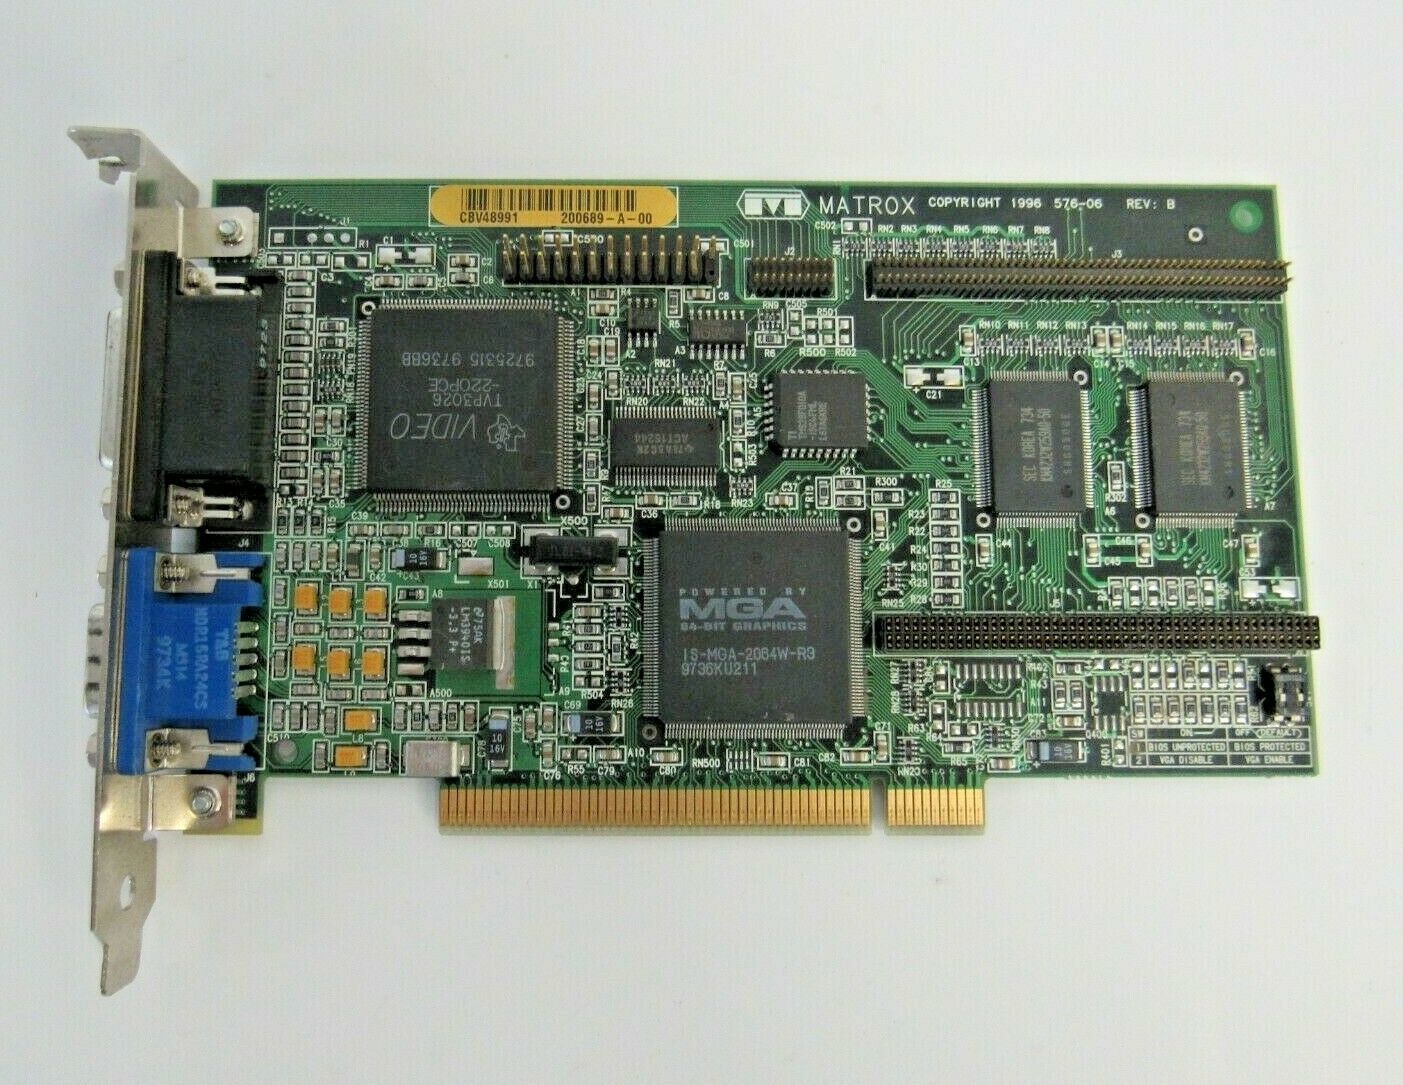 Primary image for HP Matrox 5064-0285 576-06 revb D3568-69006 Graphics Card 20-3